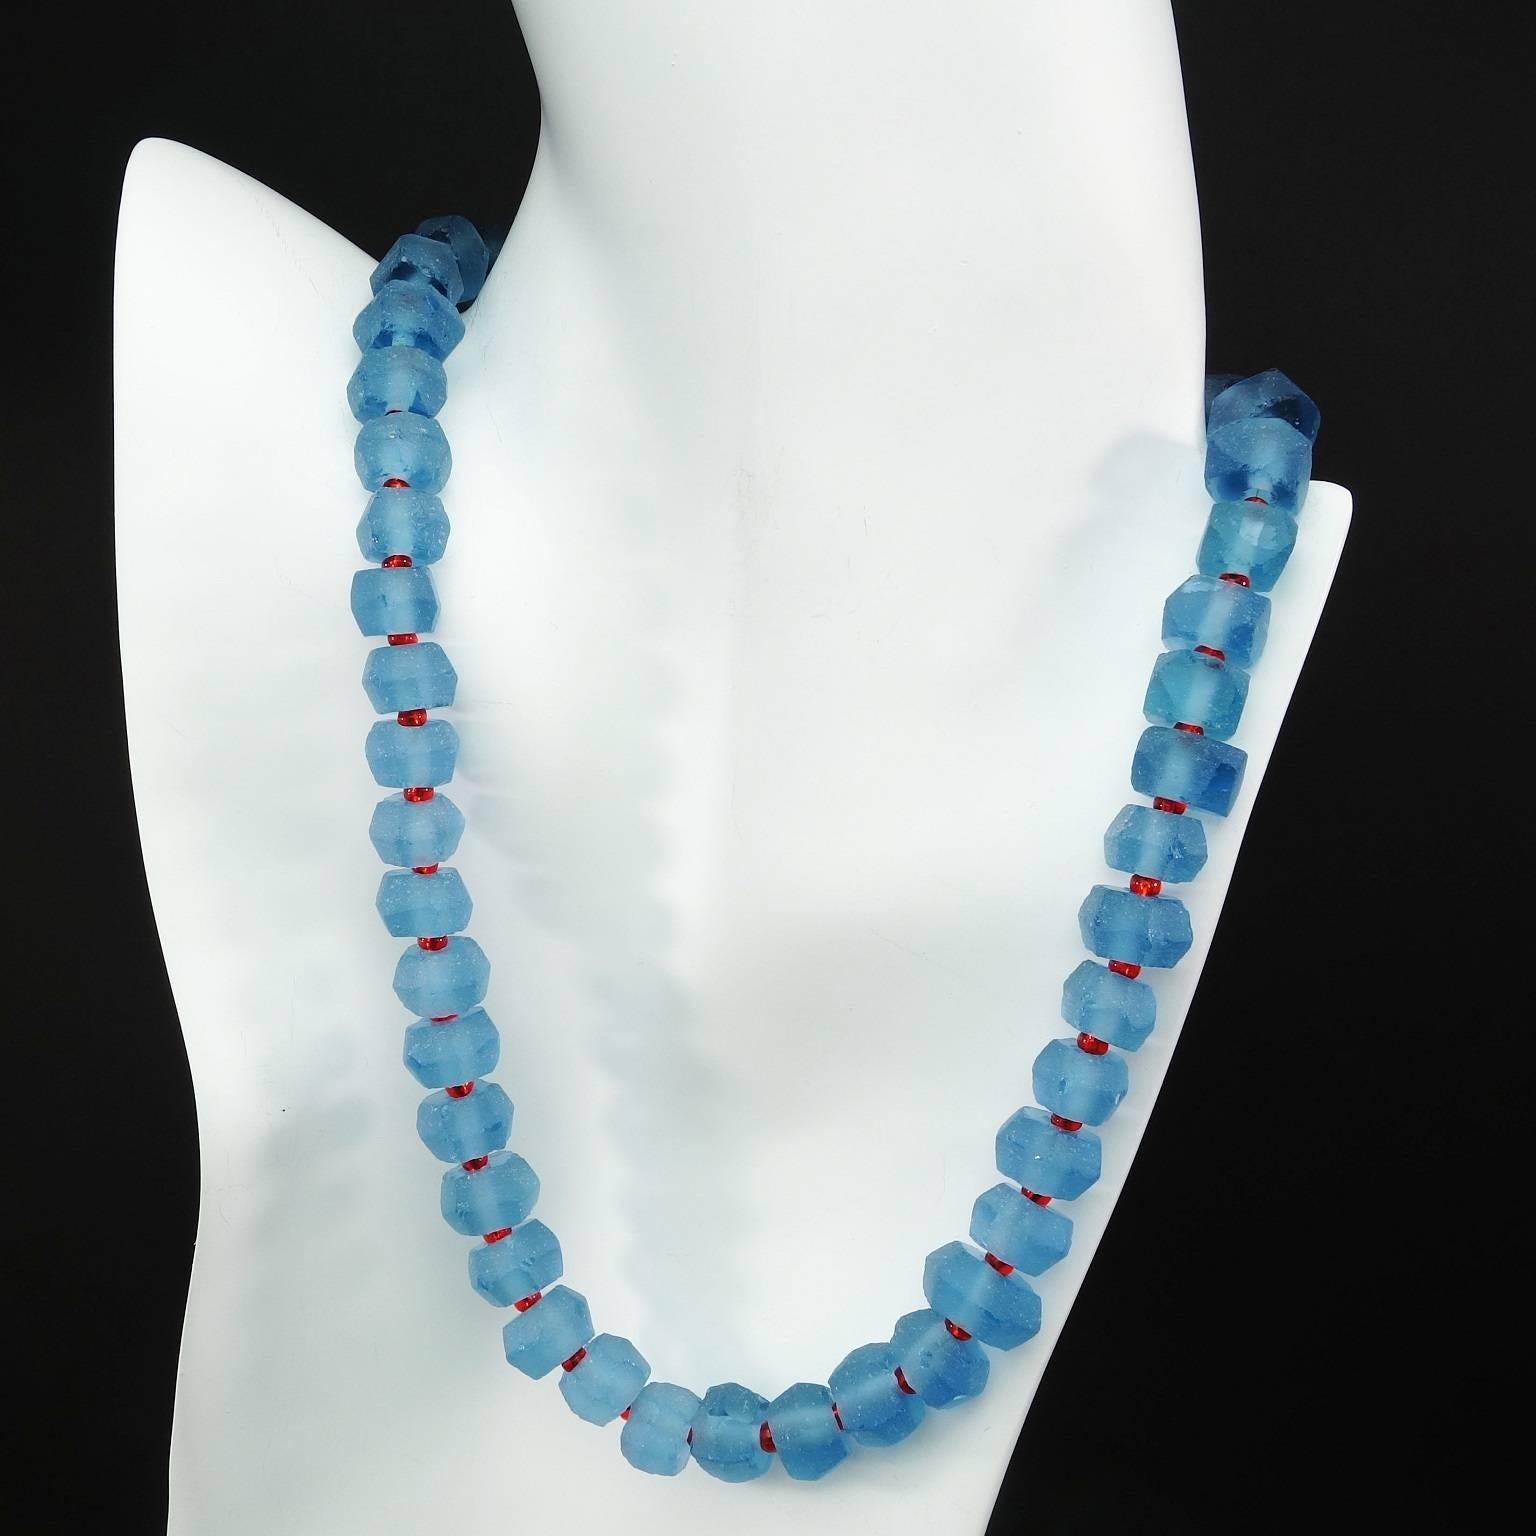 Checkerboard gemcut frosted blue Sea Glass rondels with red sparkly accents necklace.  Size: up to approximately 10 mm;  Length: 17.5 inches;  Clasp: silver tone.  More from this seller by putting gemjunky into 1stdibs search bar.